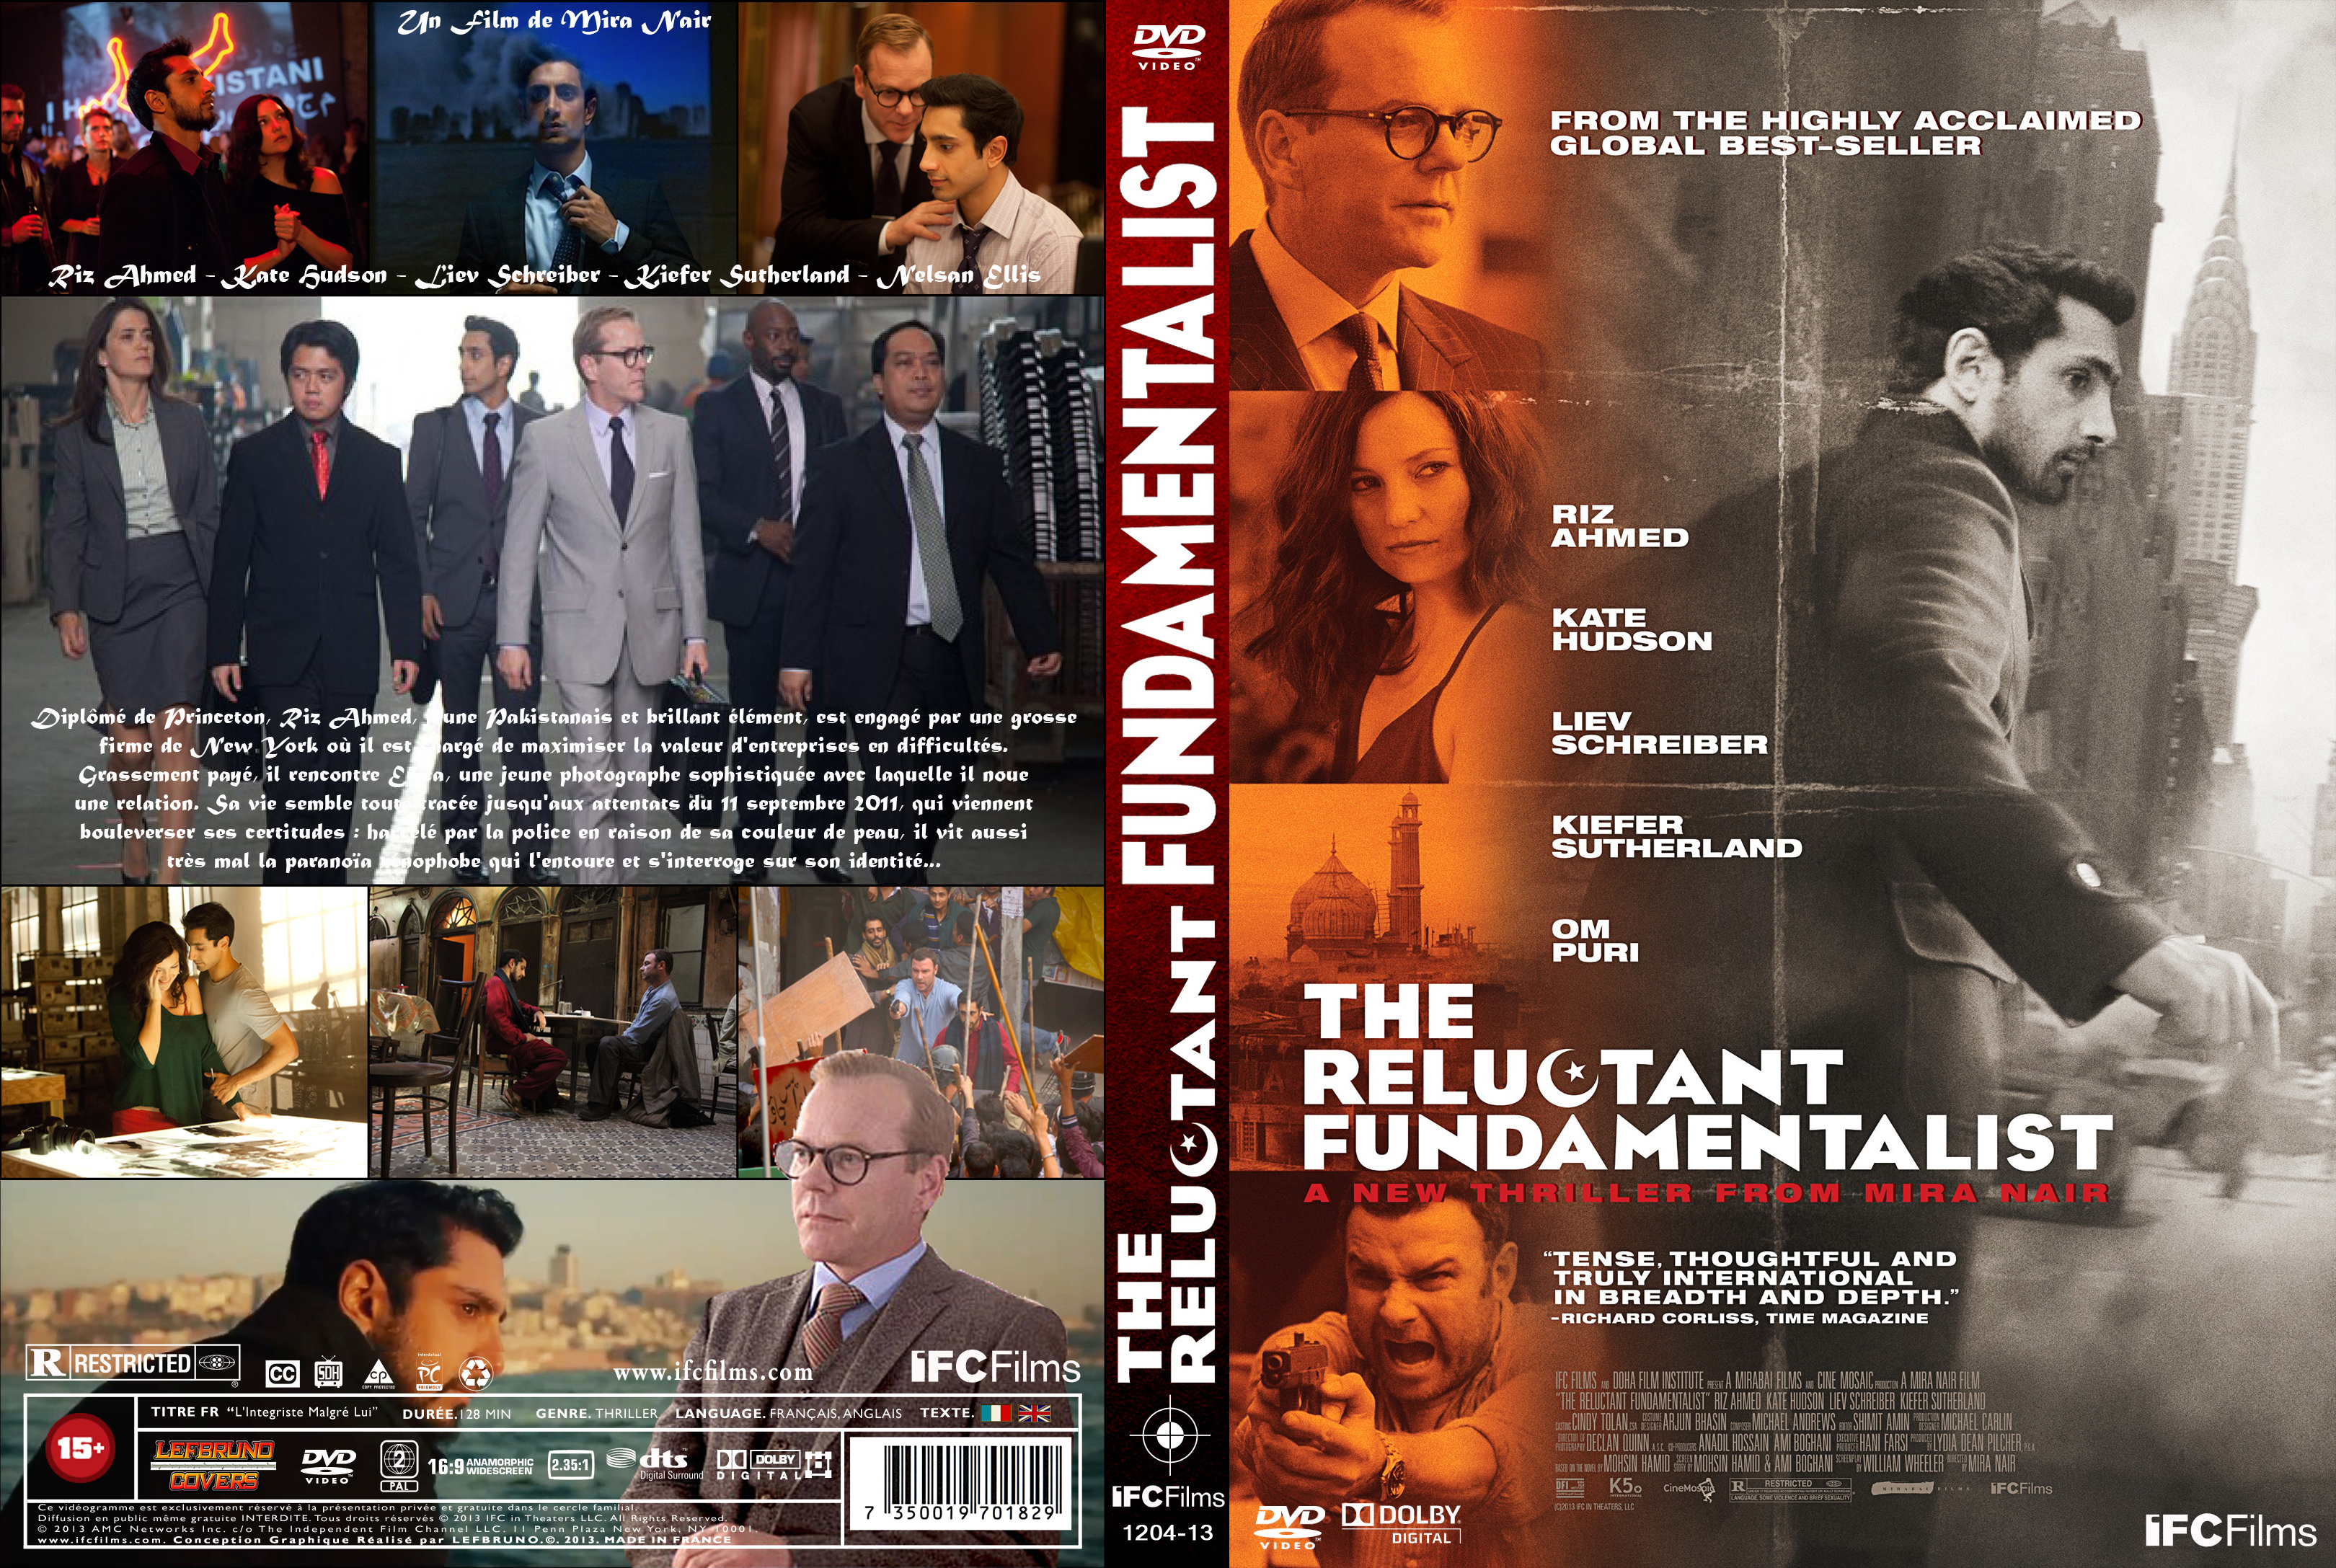 Jaquette DVD The Reluctant Fundamentalist custom